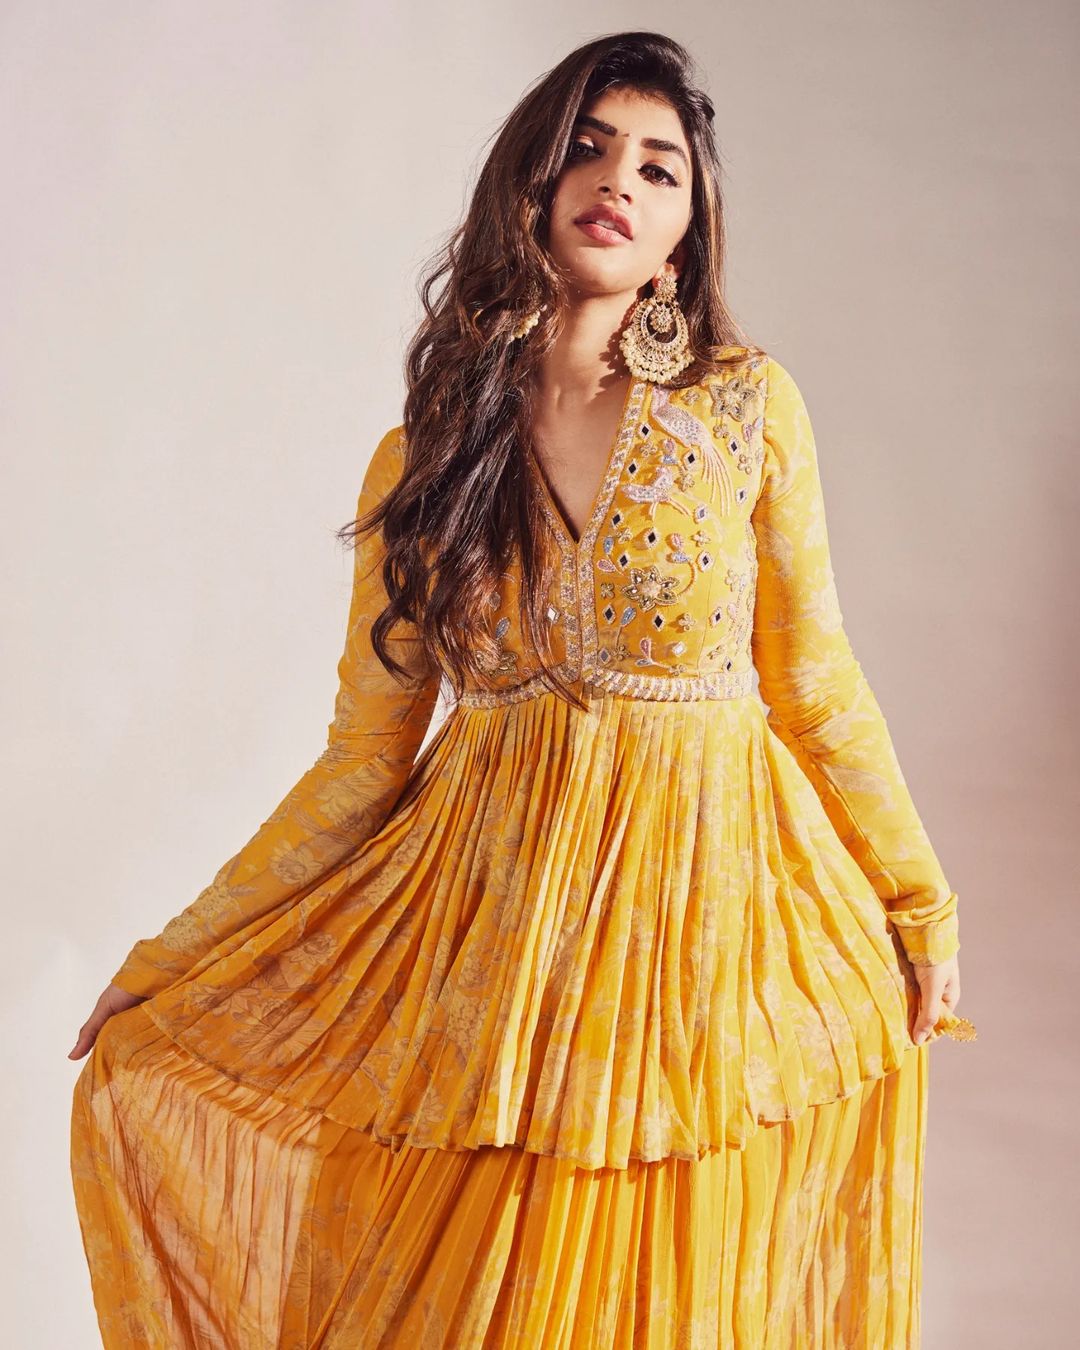 Beautiful Sreeleela In Yellow Kurta Skirt Outfit Can Be Your Festive Wear Sreeleela Beautiful and Elegant Outfit Looks